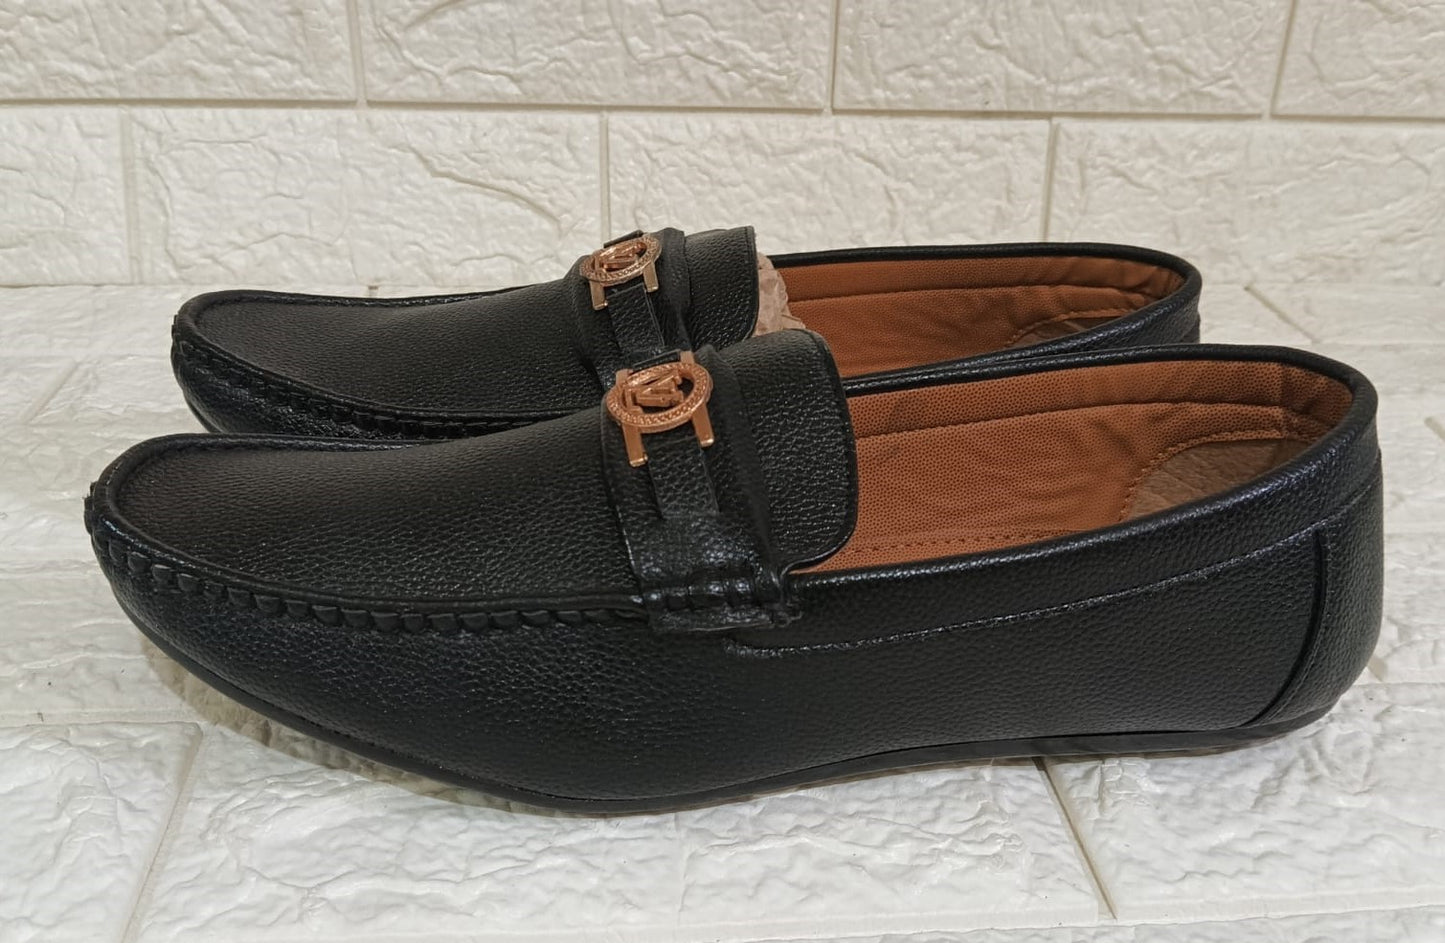 Loafers Shoes For Men - Defective